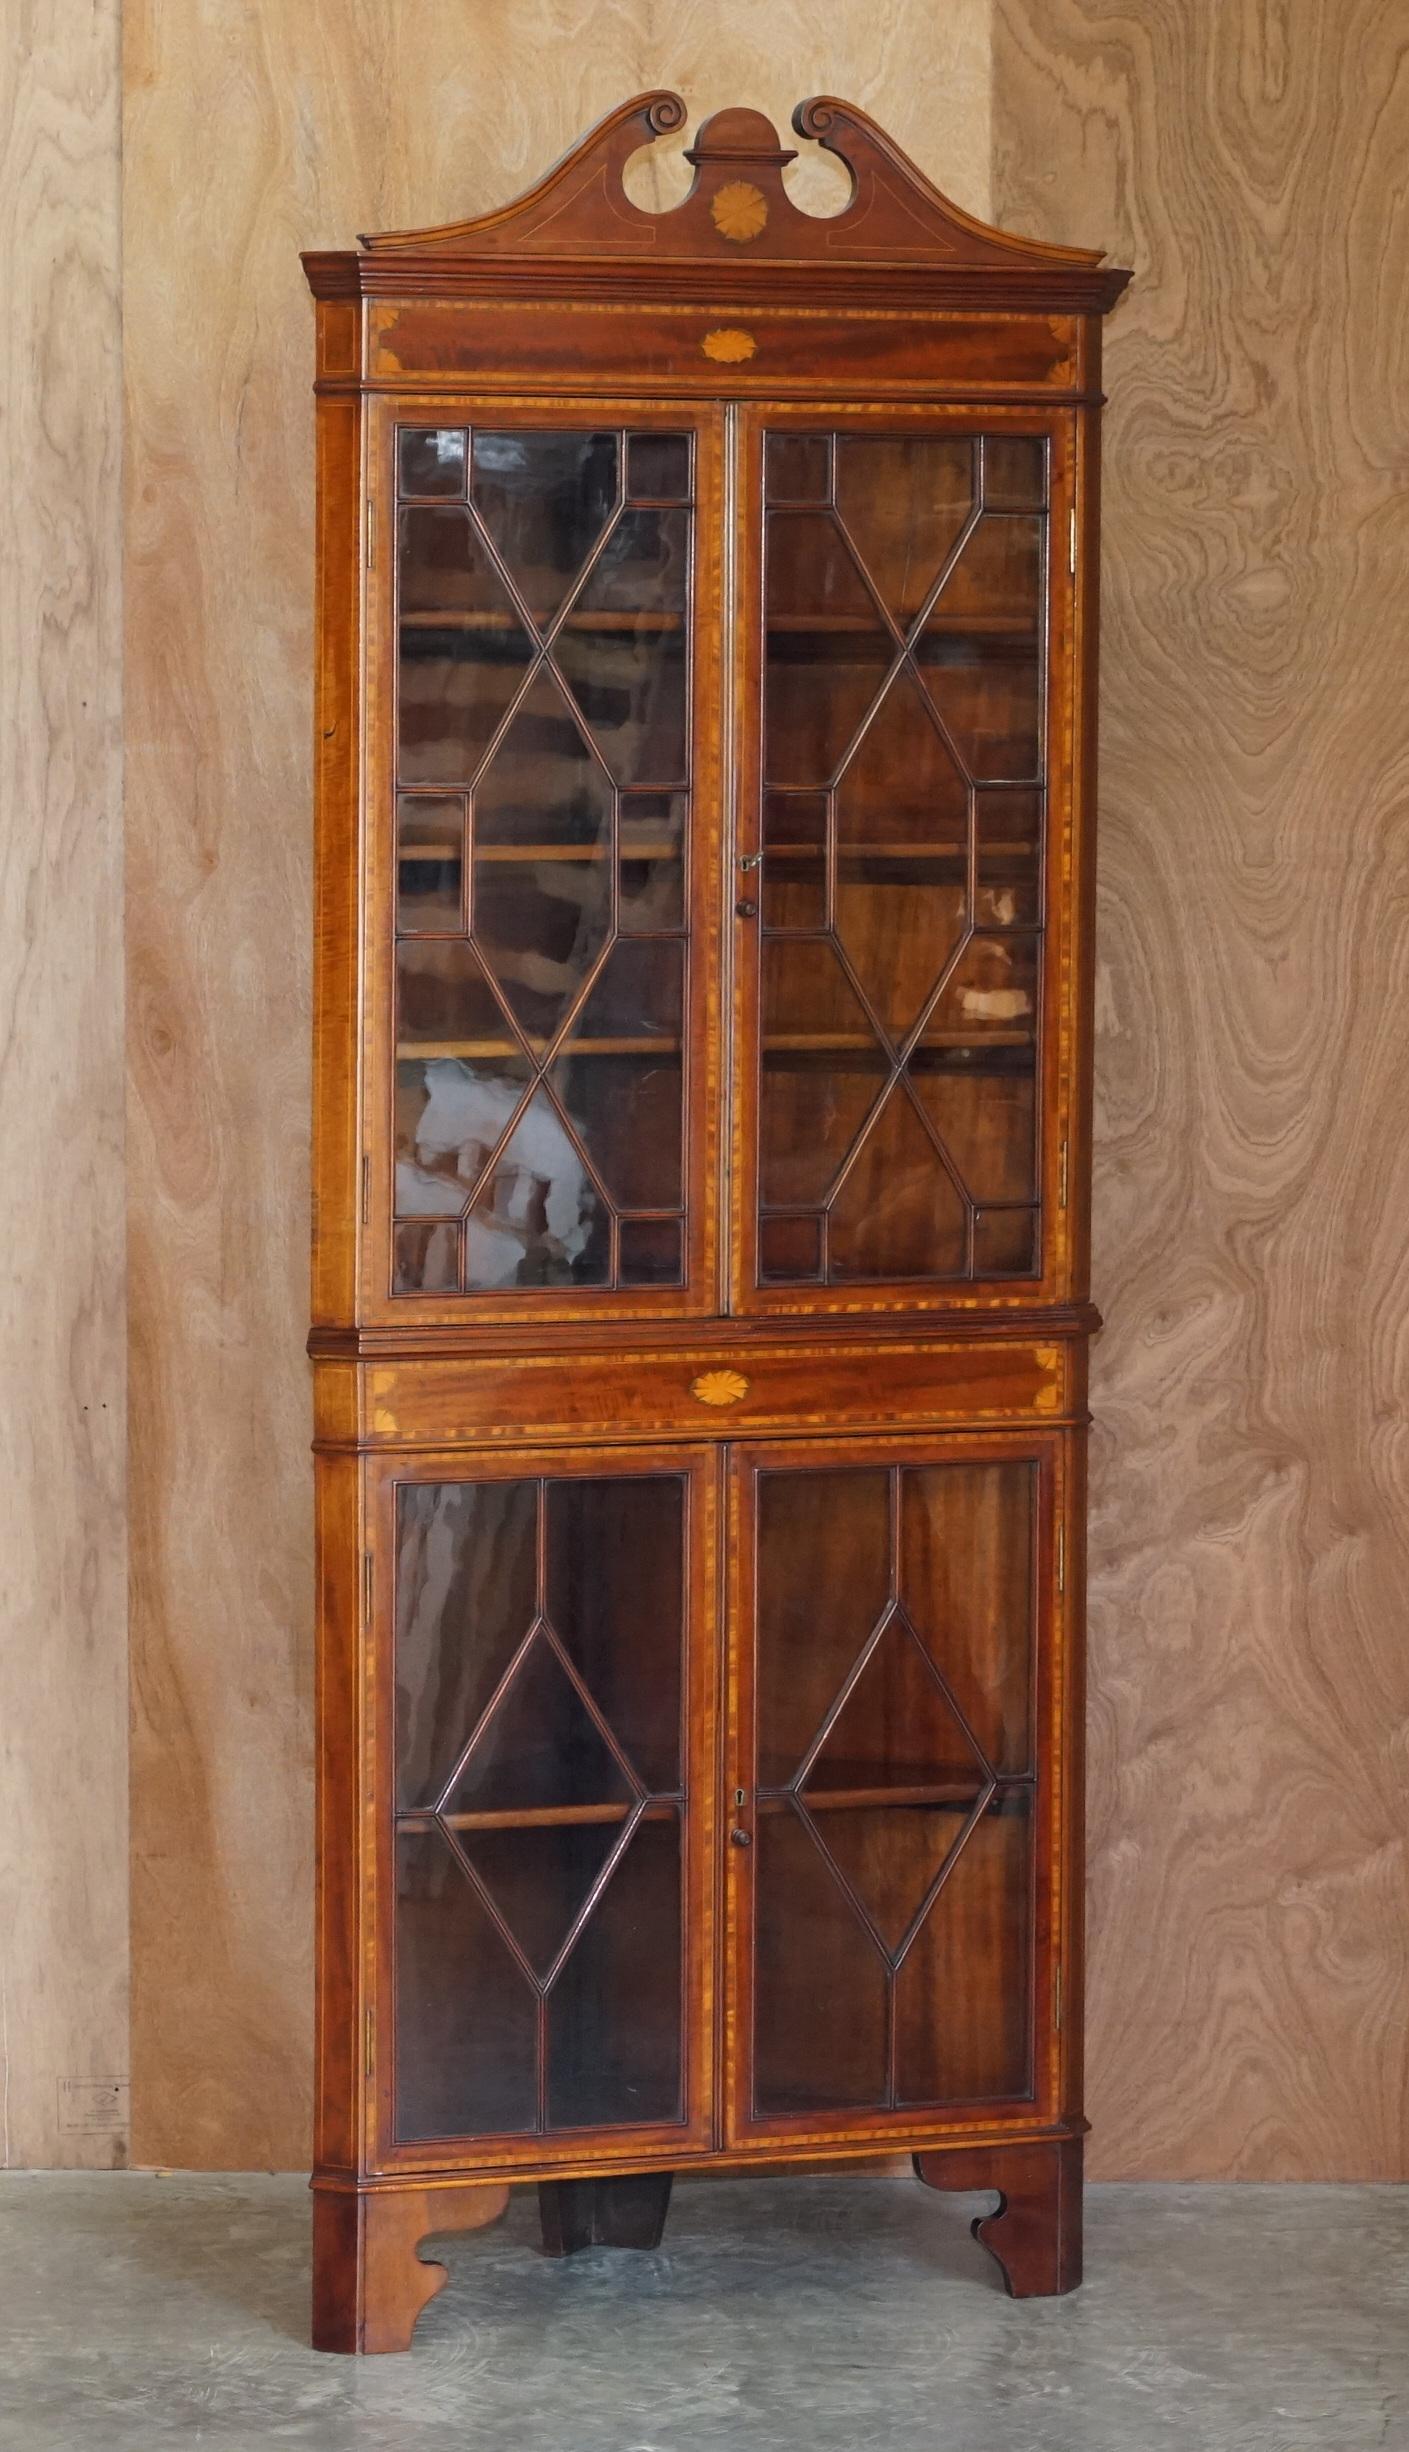 We are delighted to offer stunning Victorian Sheraton Revival corner bookcase with Astral glazed door and original key 

A very decorative piece, beautifully inlaid in Satinwood & Walnut, this piece is like pure art furniture. The astral glazed